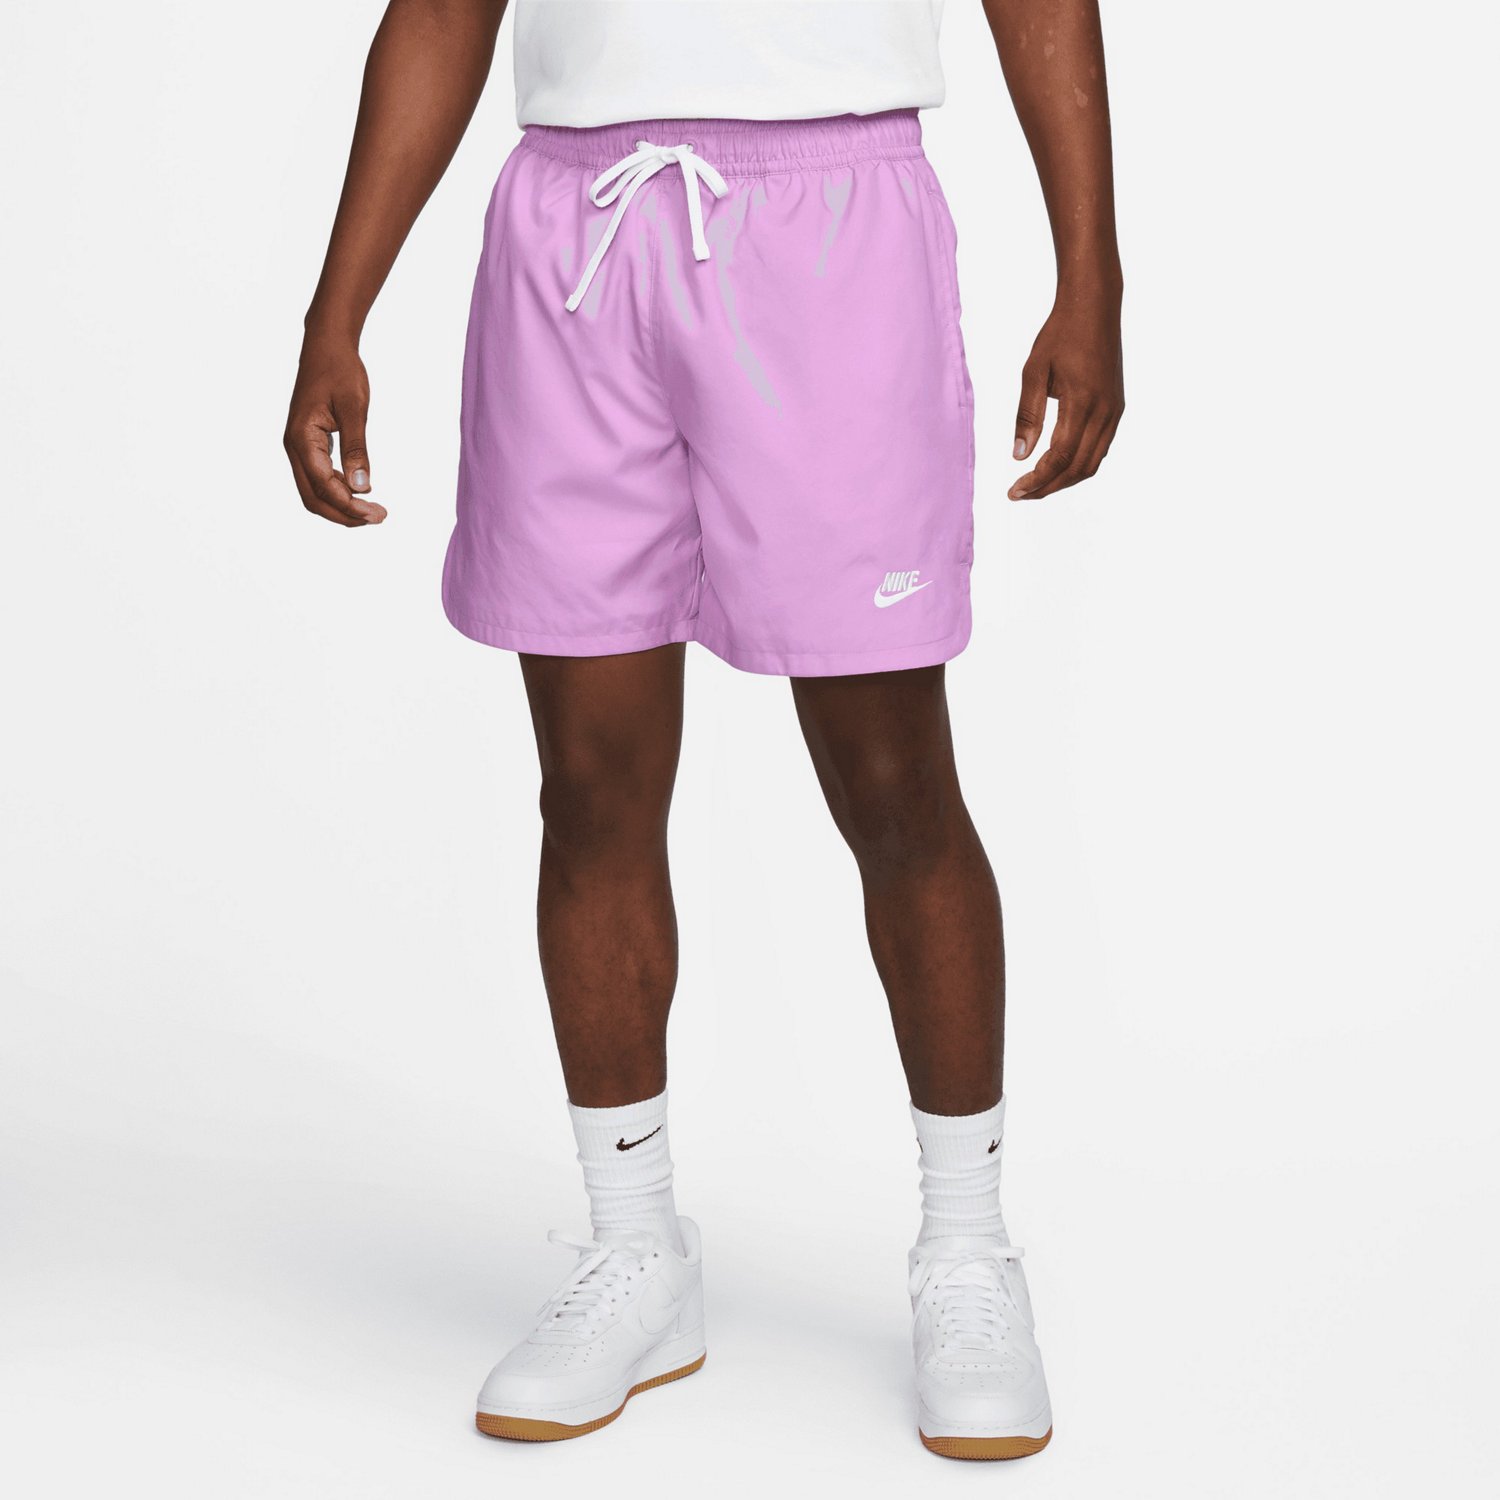 Nike Men's Woven Lined Flow Shorts | Free Shipping at Academy